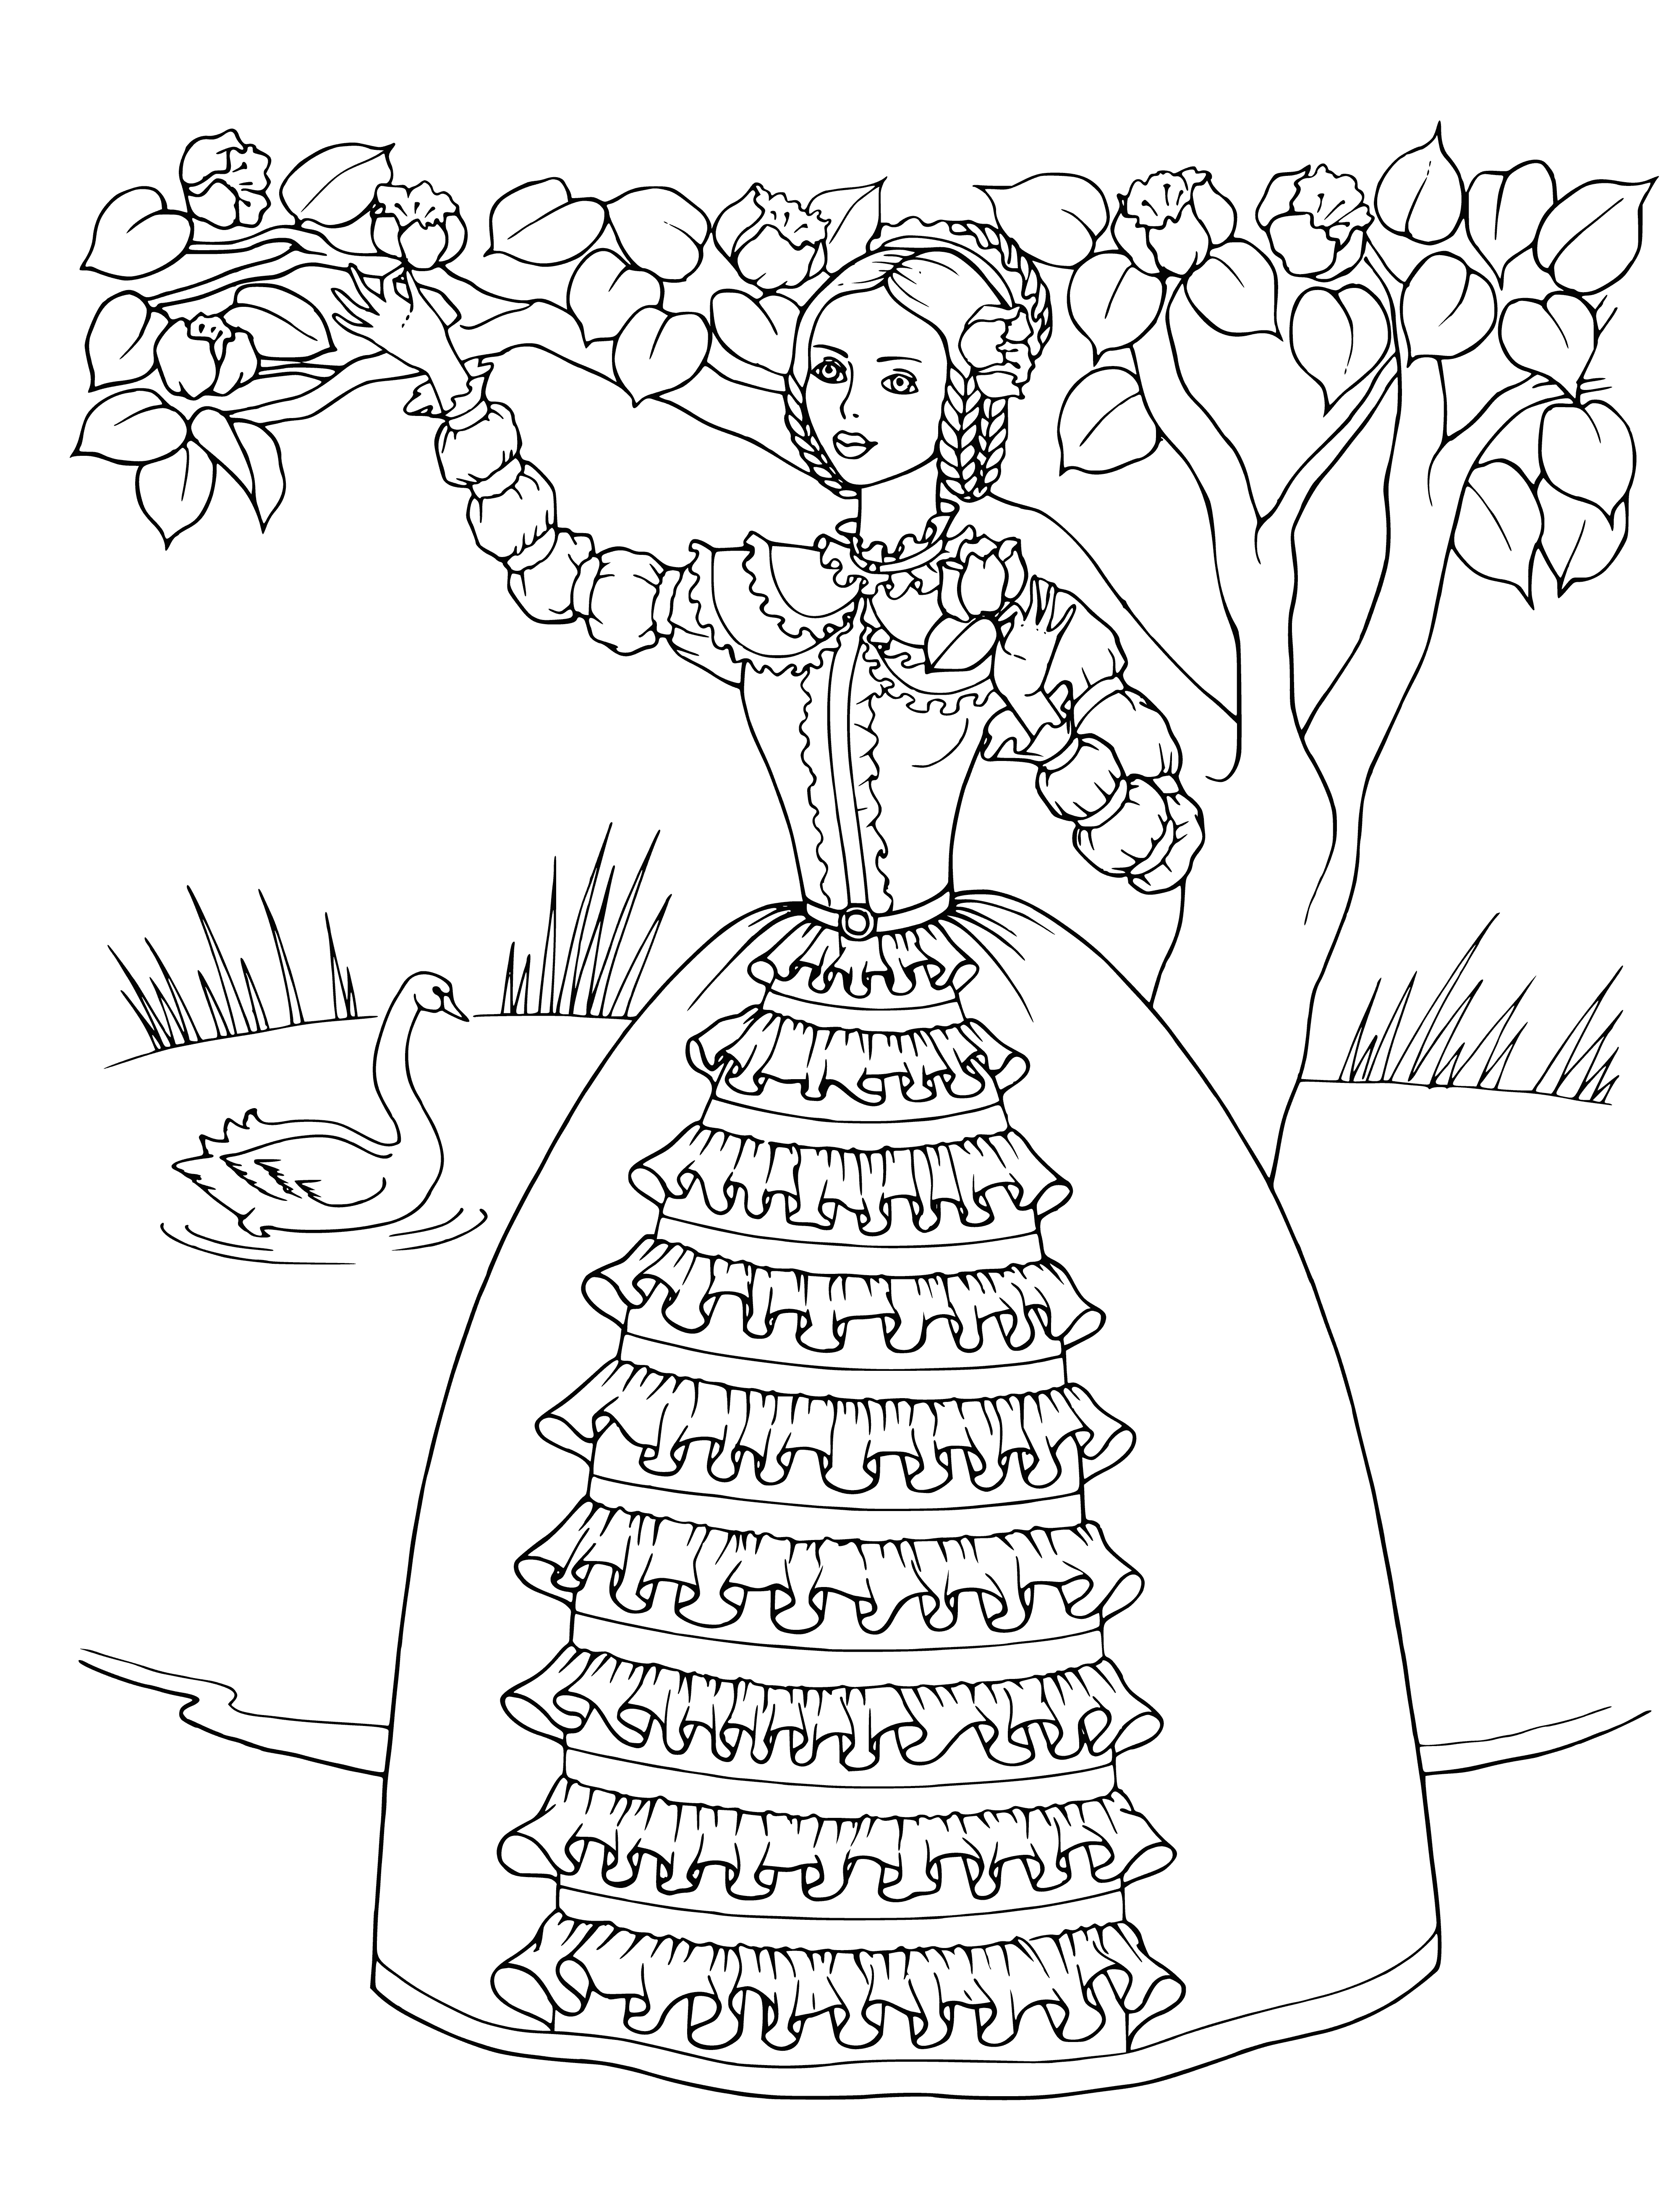 coloring page: Young woman in diaphanous gown seated in garden among flowers; putto holds roses, she wears pearl jewelry & has serene expression.